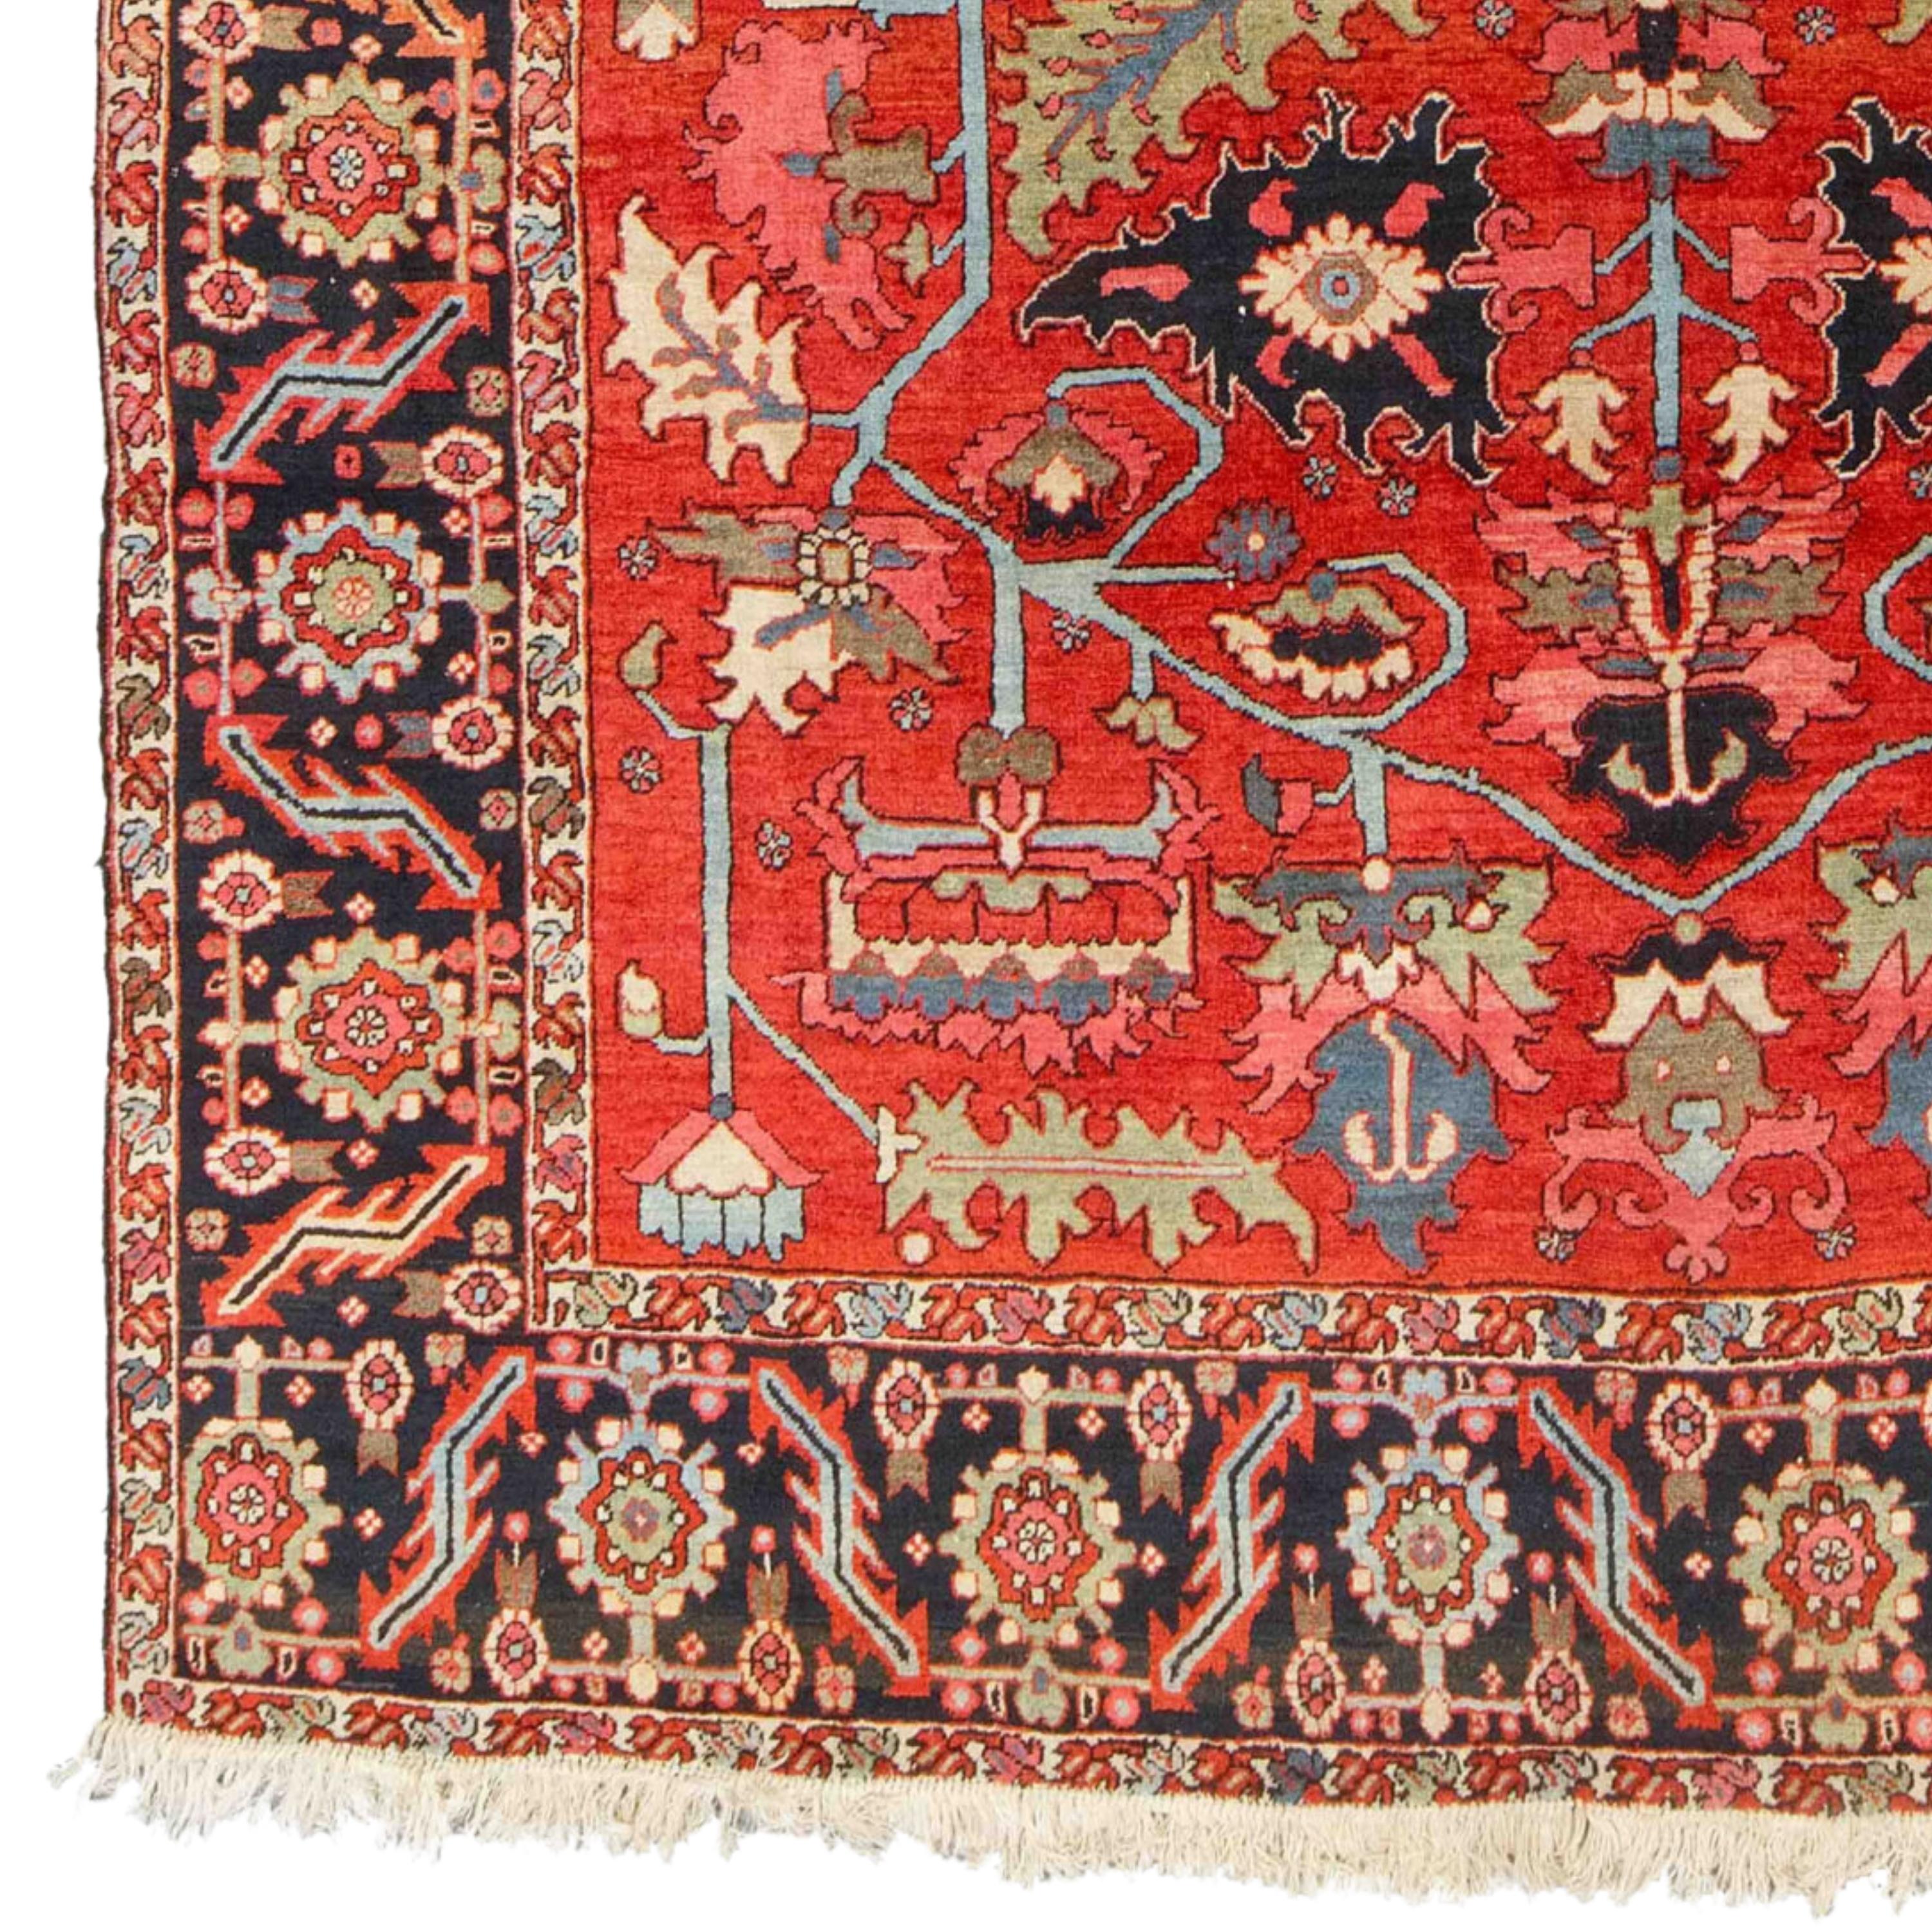 19th Century Heriz Rug

This magnificent 19th-century antique Heriz rug is a masterpiece that weaves the history, art and culture of its time into its intricate patterns. Each stitch tells a story, with skilled craftsmen meticulously crafting each